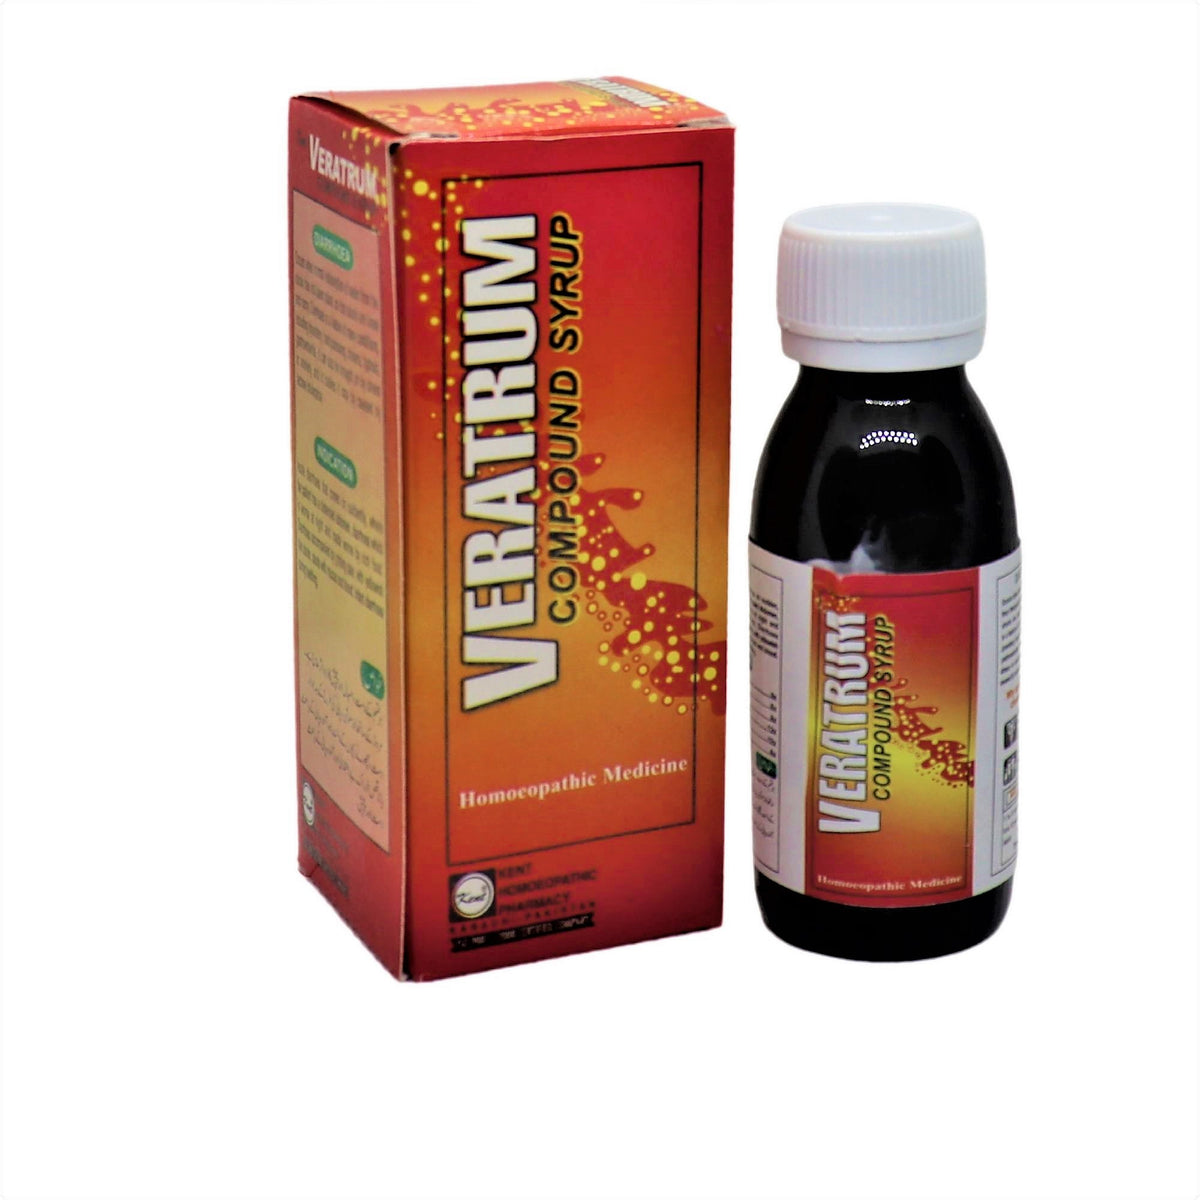 Veratrum Compound syrup & Tablet